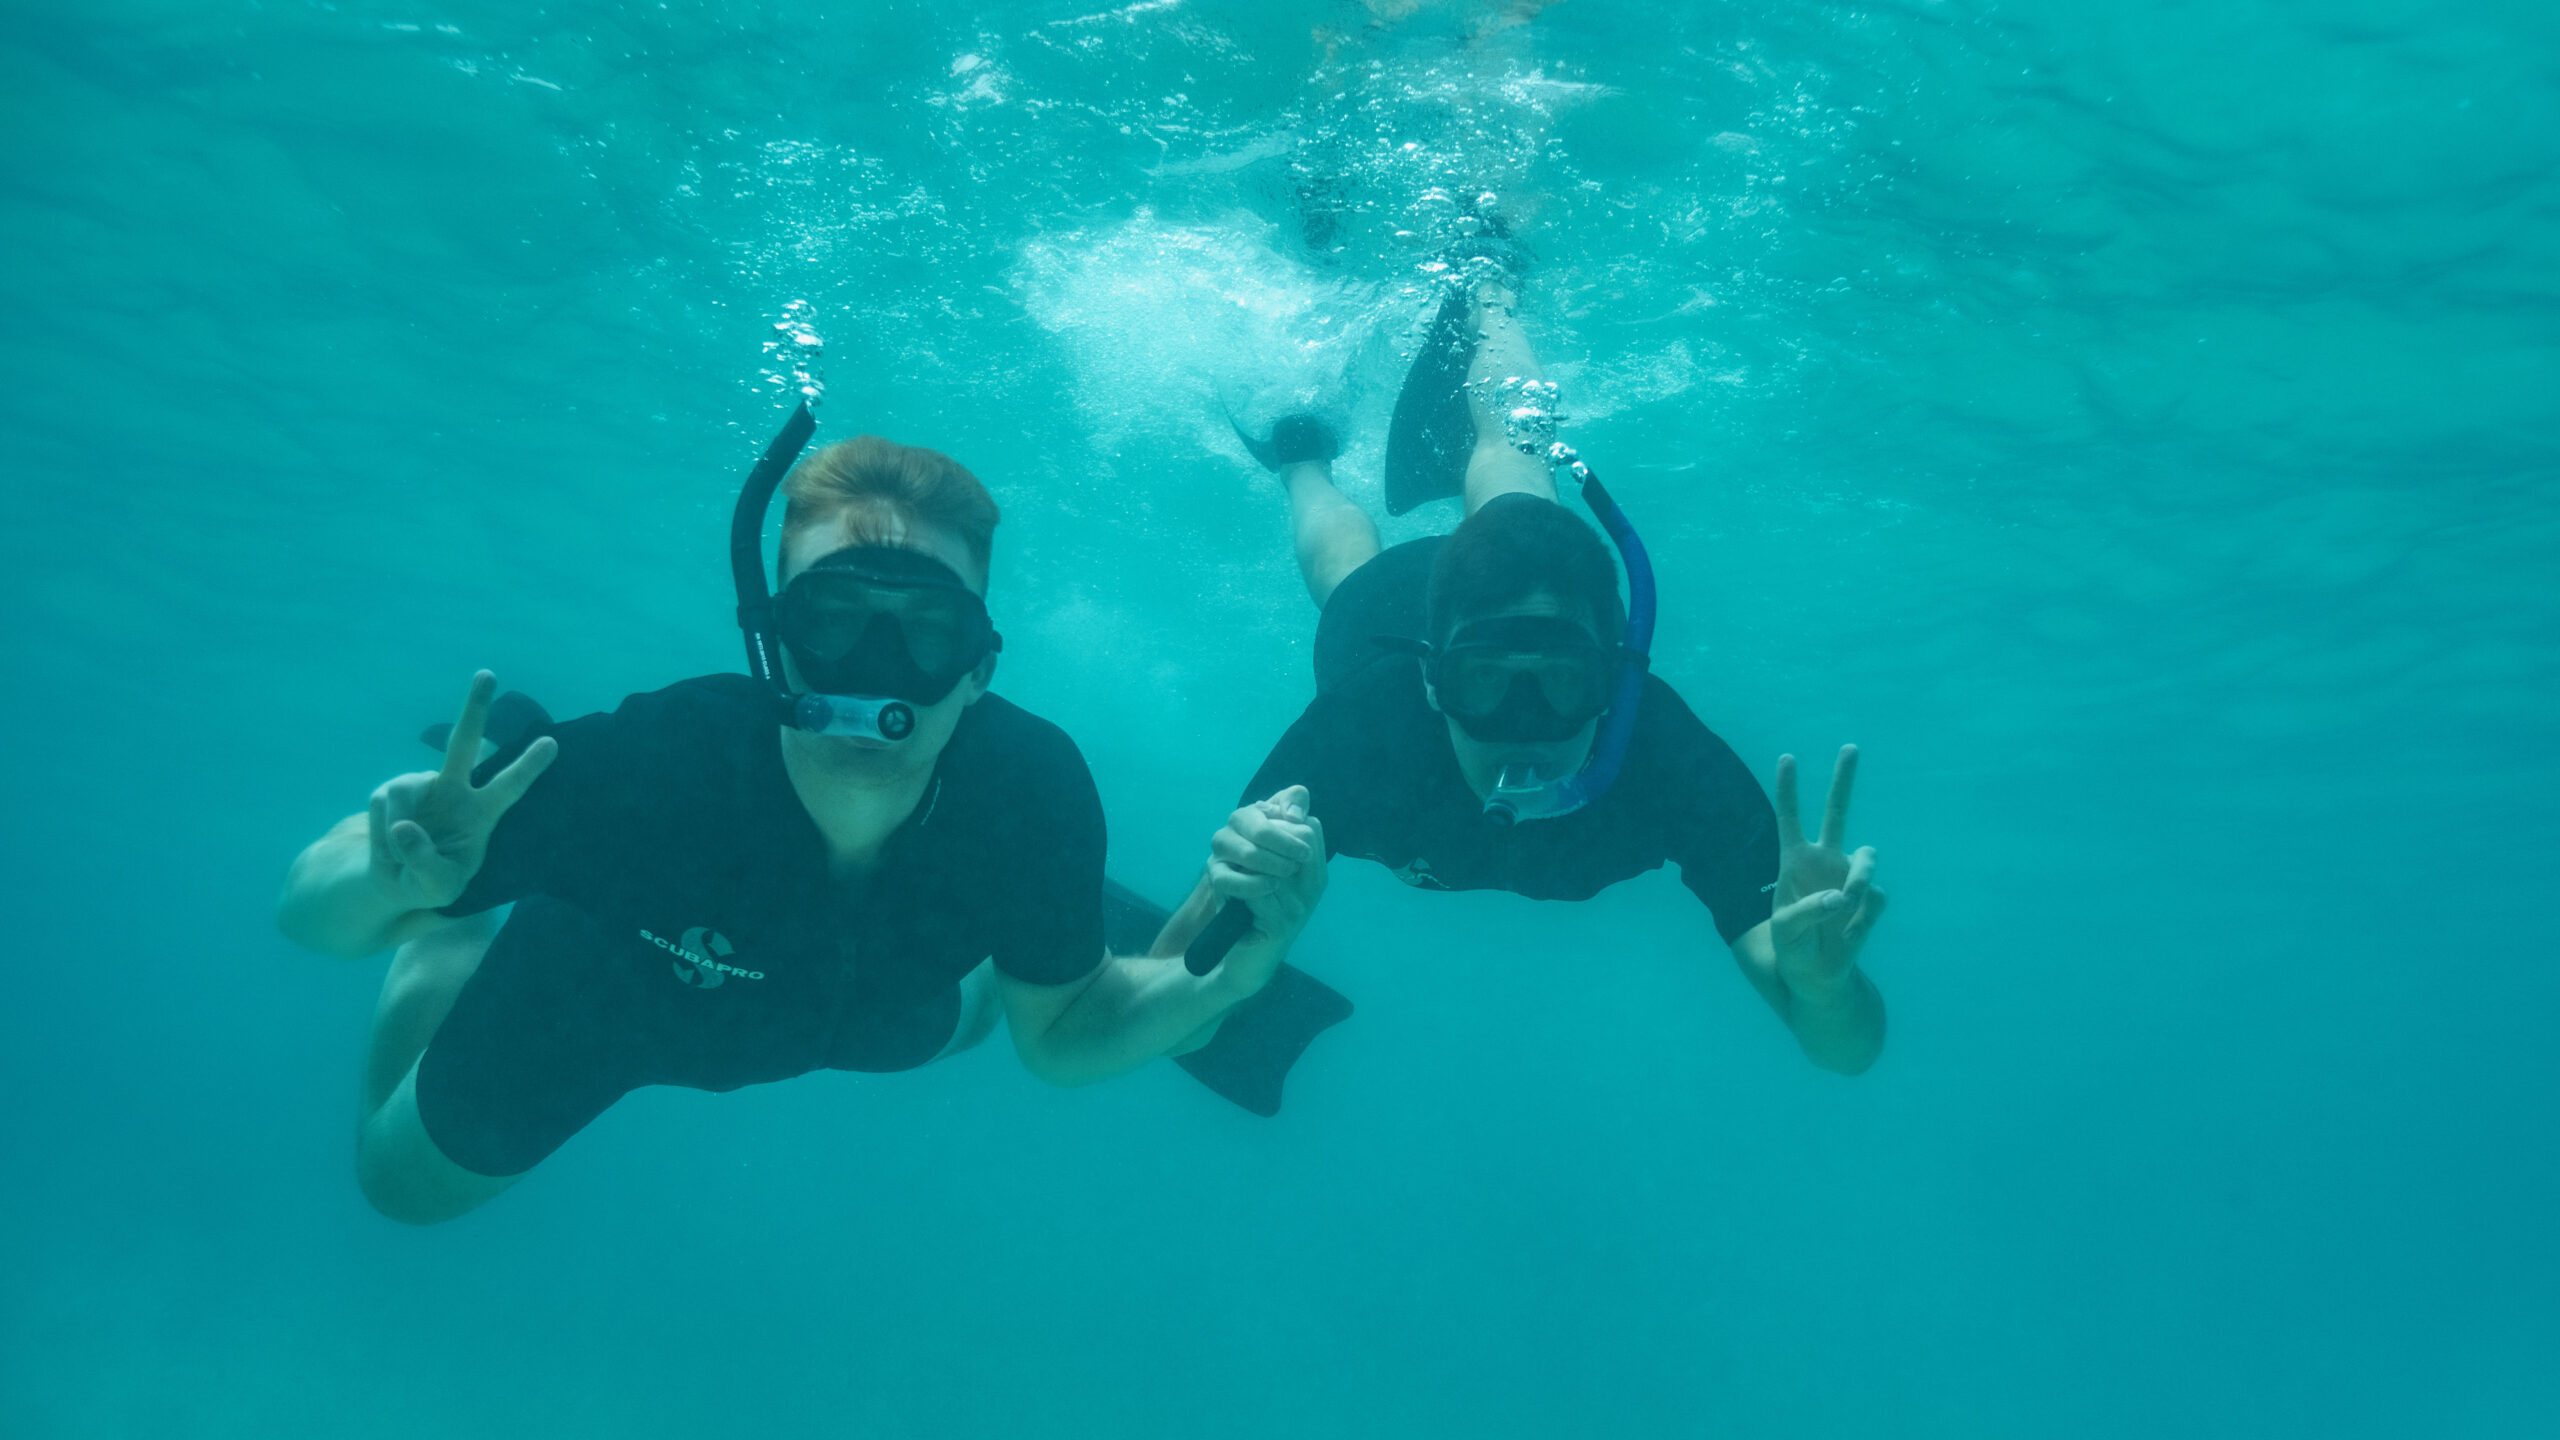 Will and James snorkeling in search of Sea Turtles (Photo Credit: David Ballesteros for Hurtigruten Expeditions)